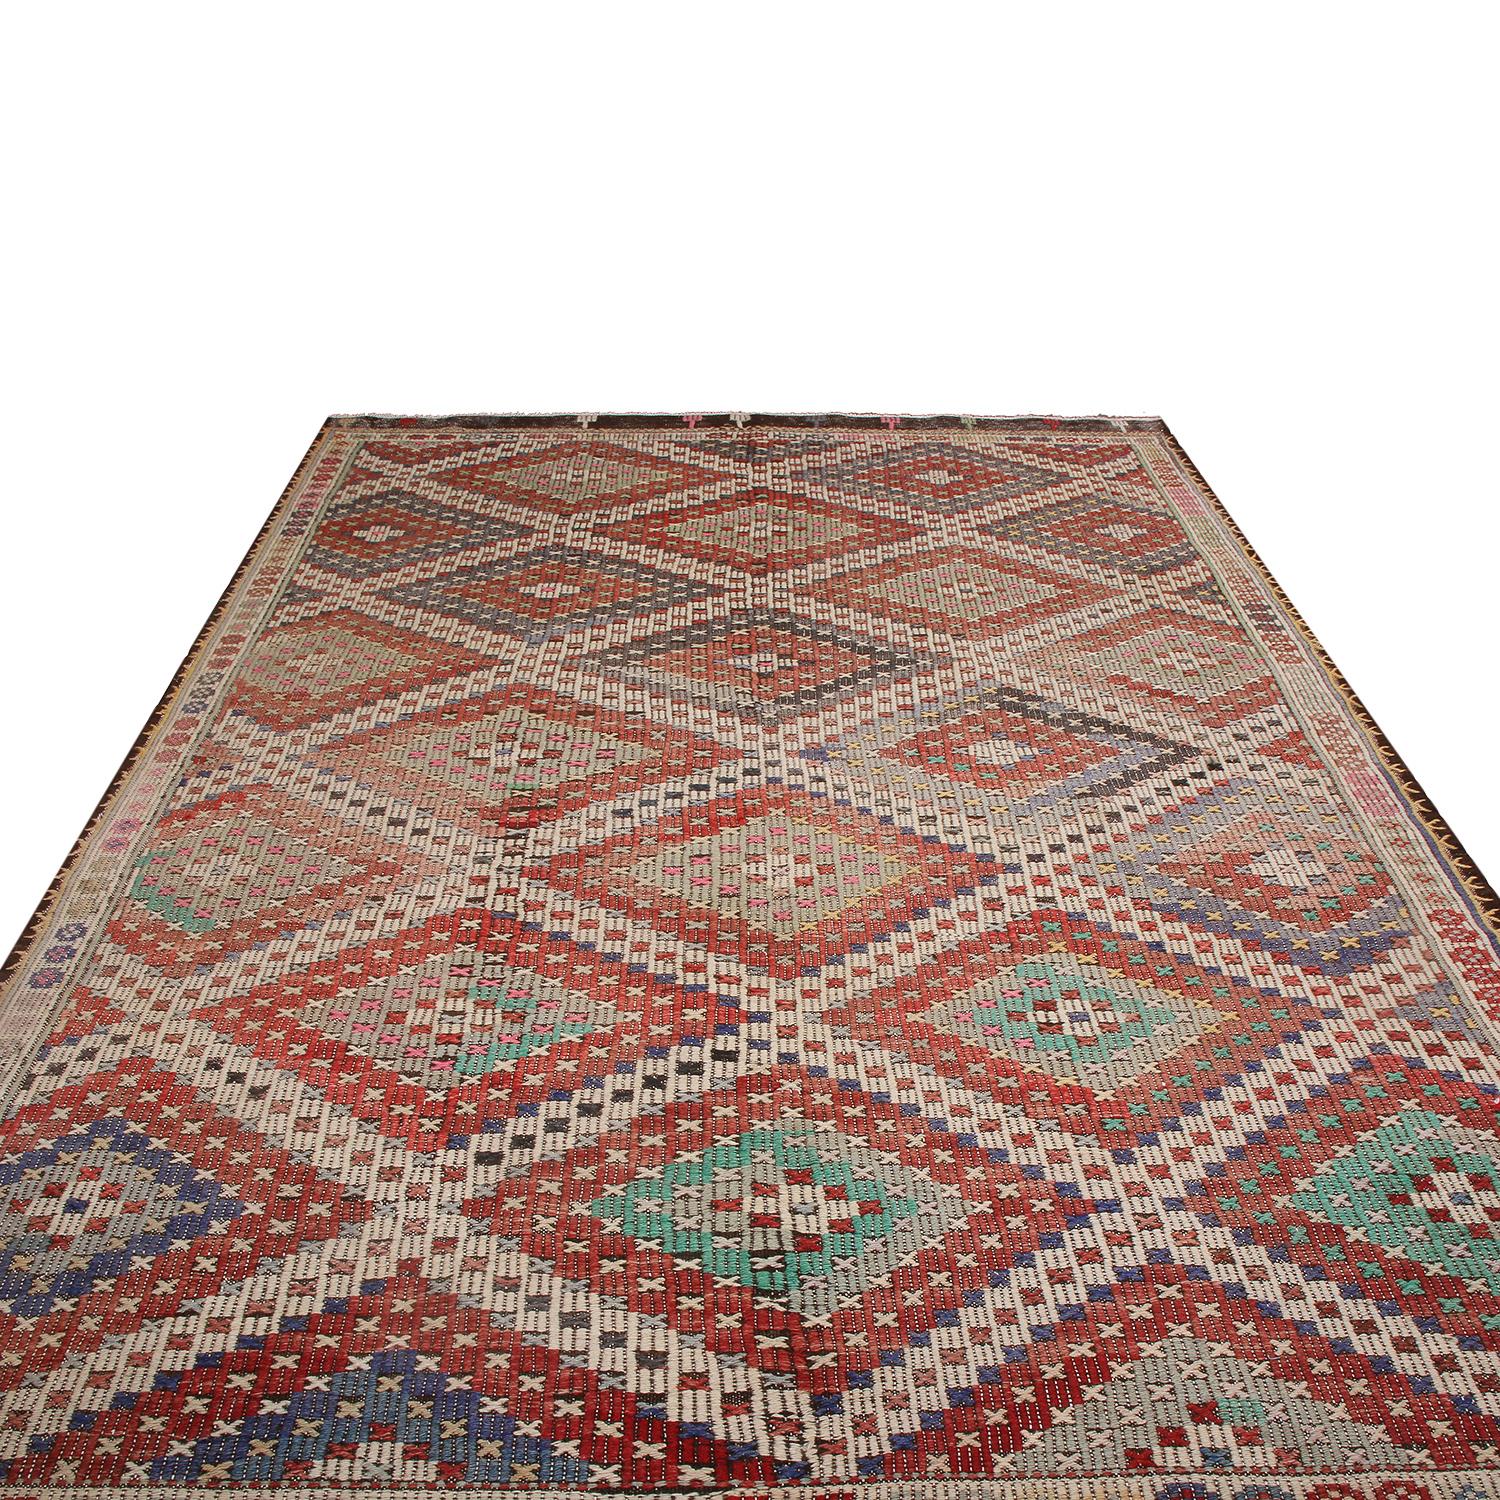 Flat-woven in Turkey originating between 1950-1960, this vintage midcentury Kilim hails from the city of Denizli, enjoying uniquely subtle variations in the accenting green, blue and pink hues among Turkish rugs playing tastefully off the rich red